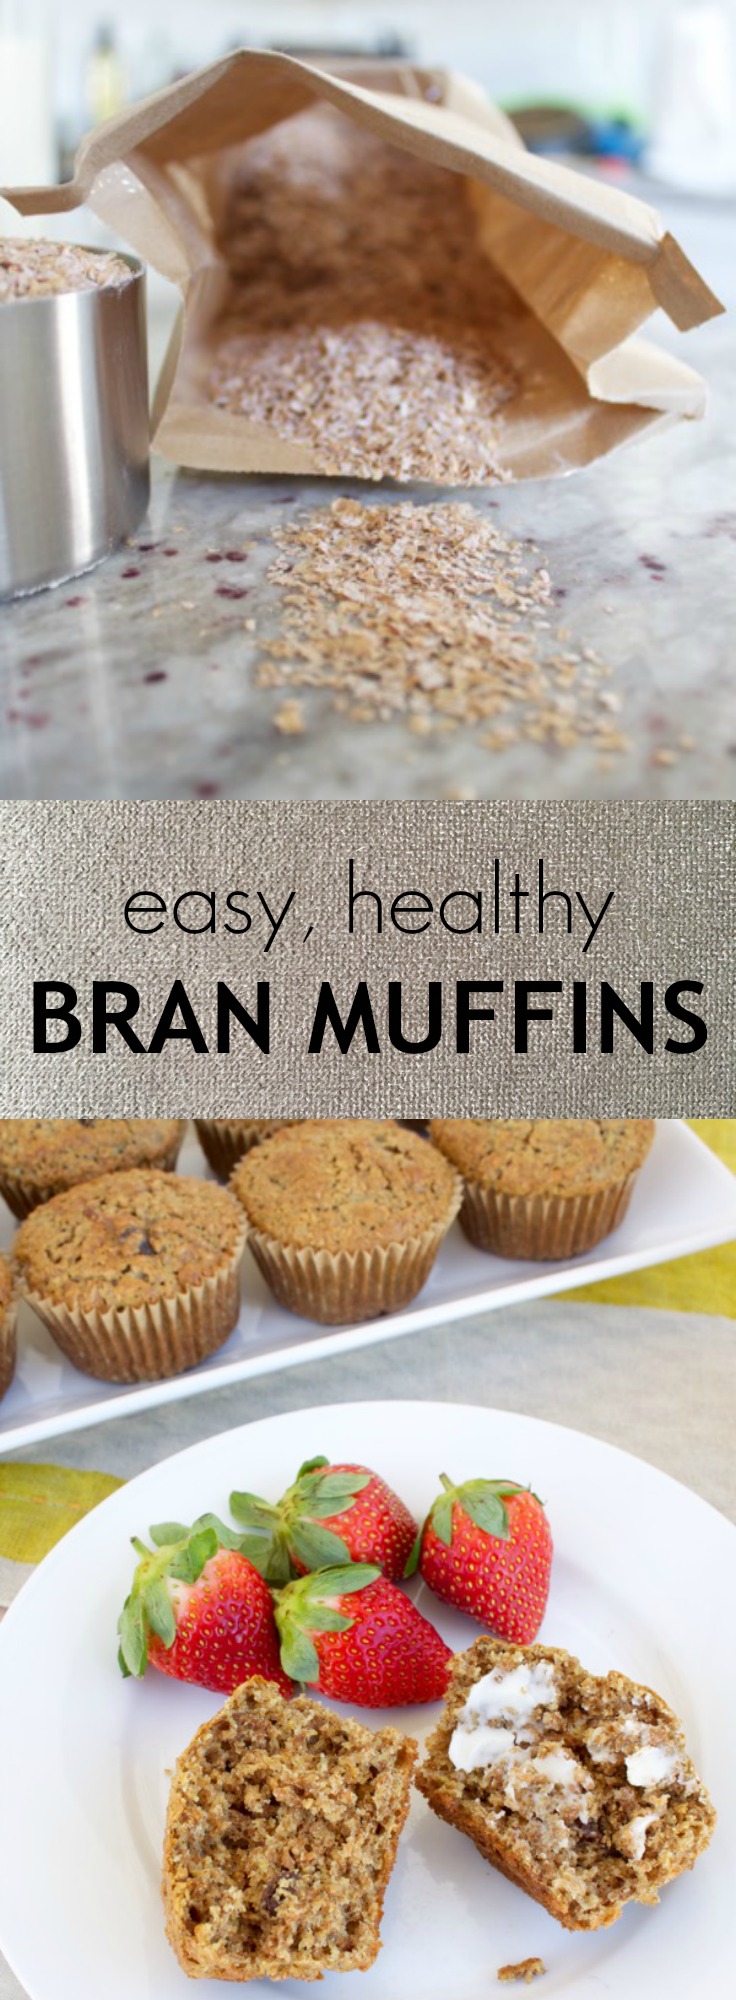 Healthy, whole-grain bran muffins are tender yet textured, get a burst of sweetness from raisins, and have a secret ingredient!